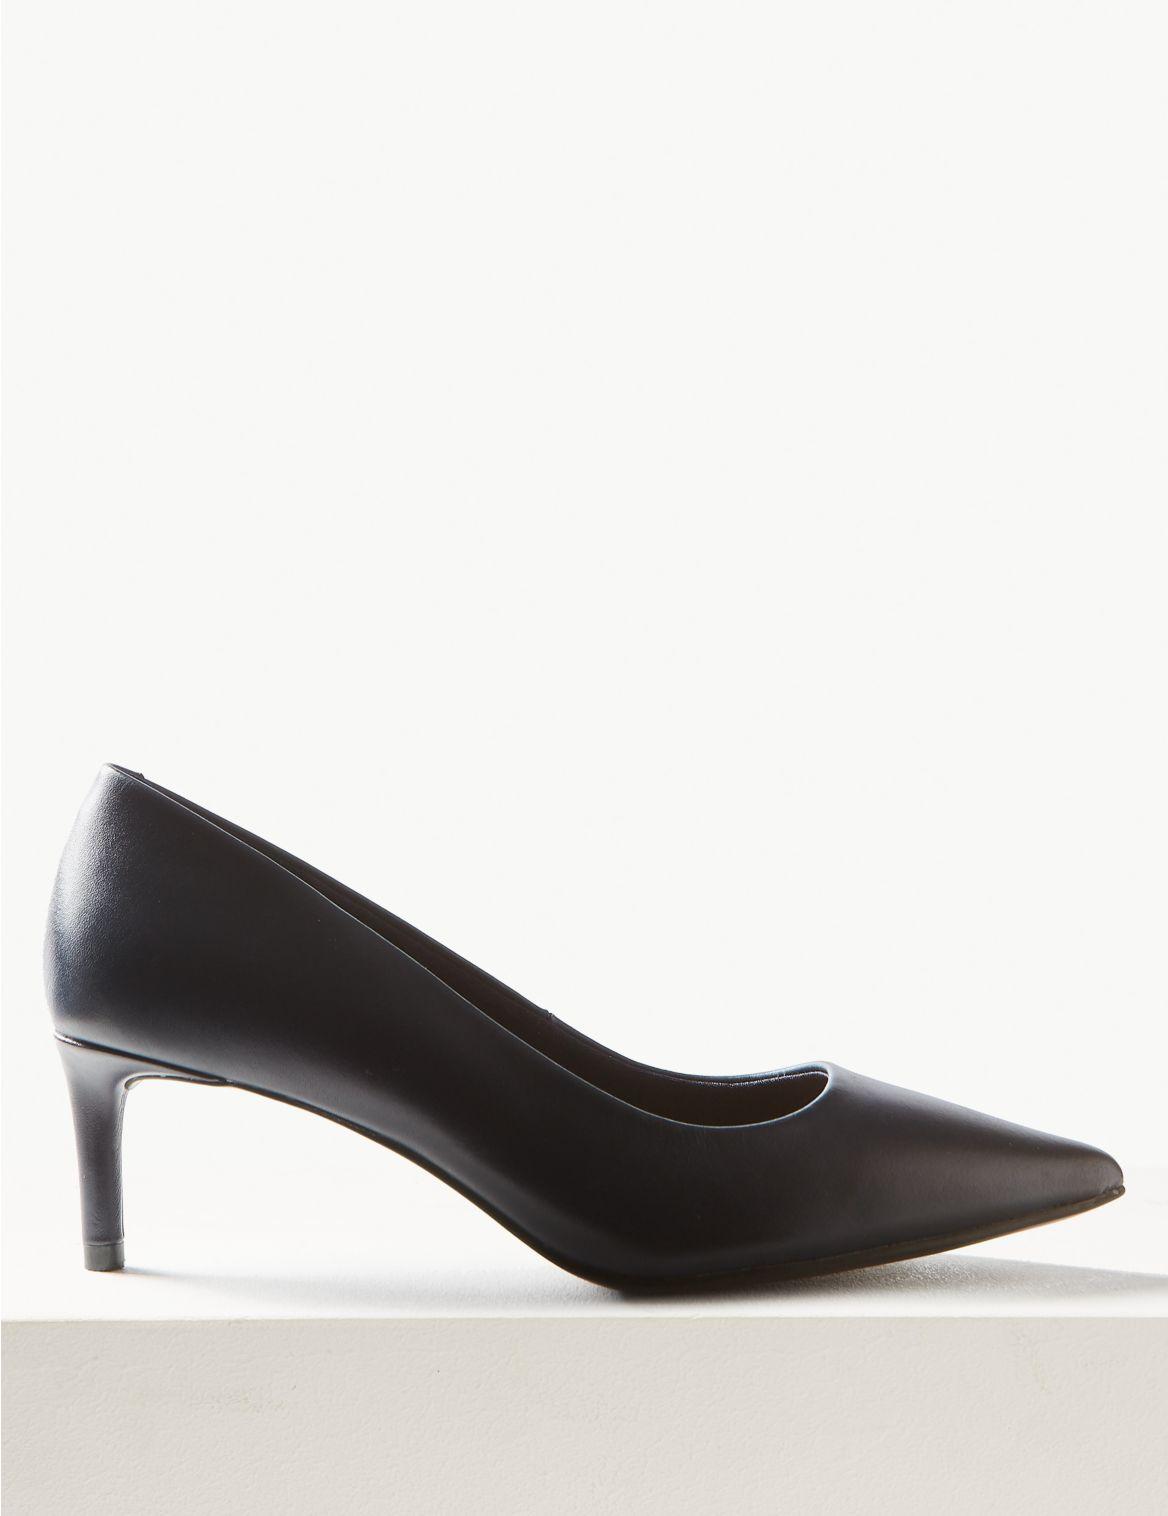 Marks & Spencer Leather Kitten Heel Court Shoes Navy in Blue - Lyst